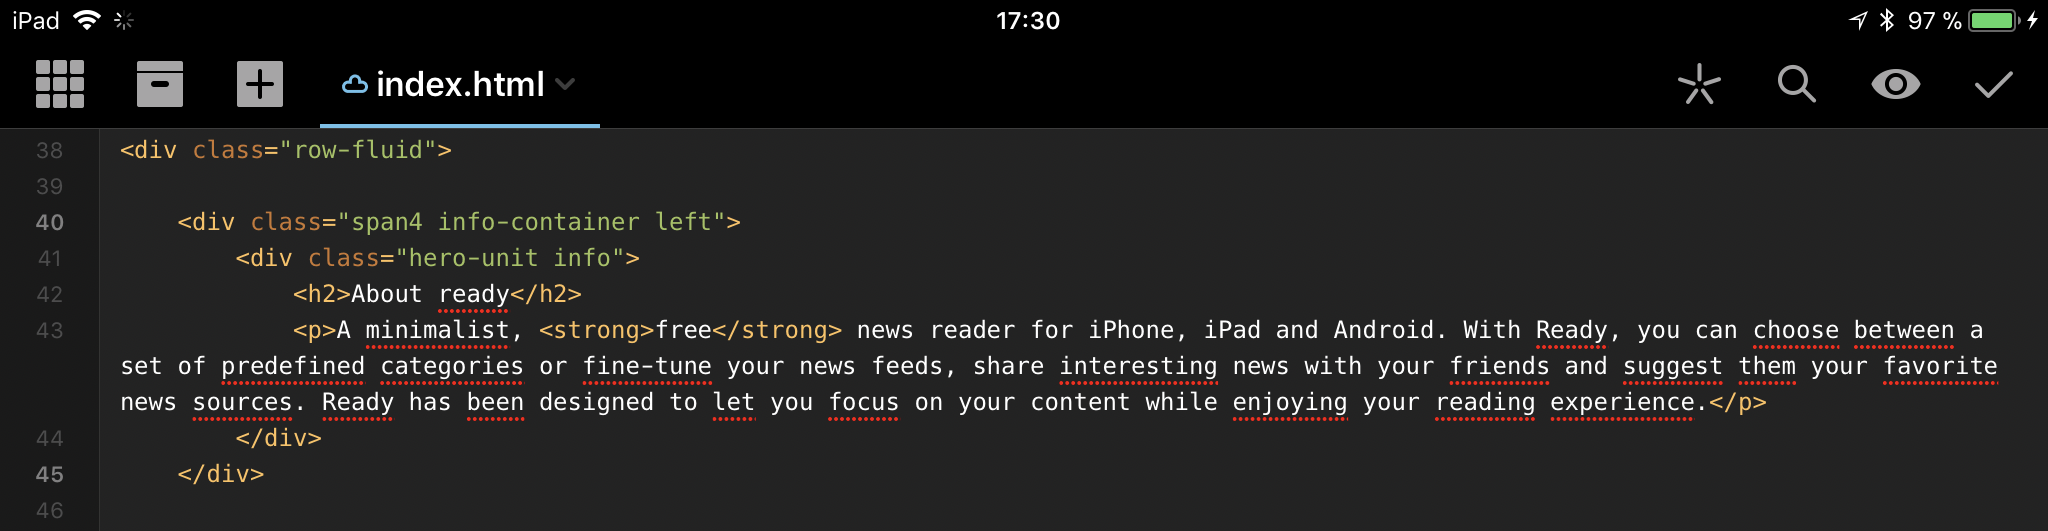 Working on an iPad Pro for Developers